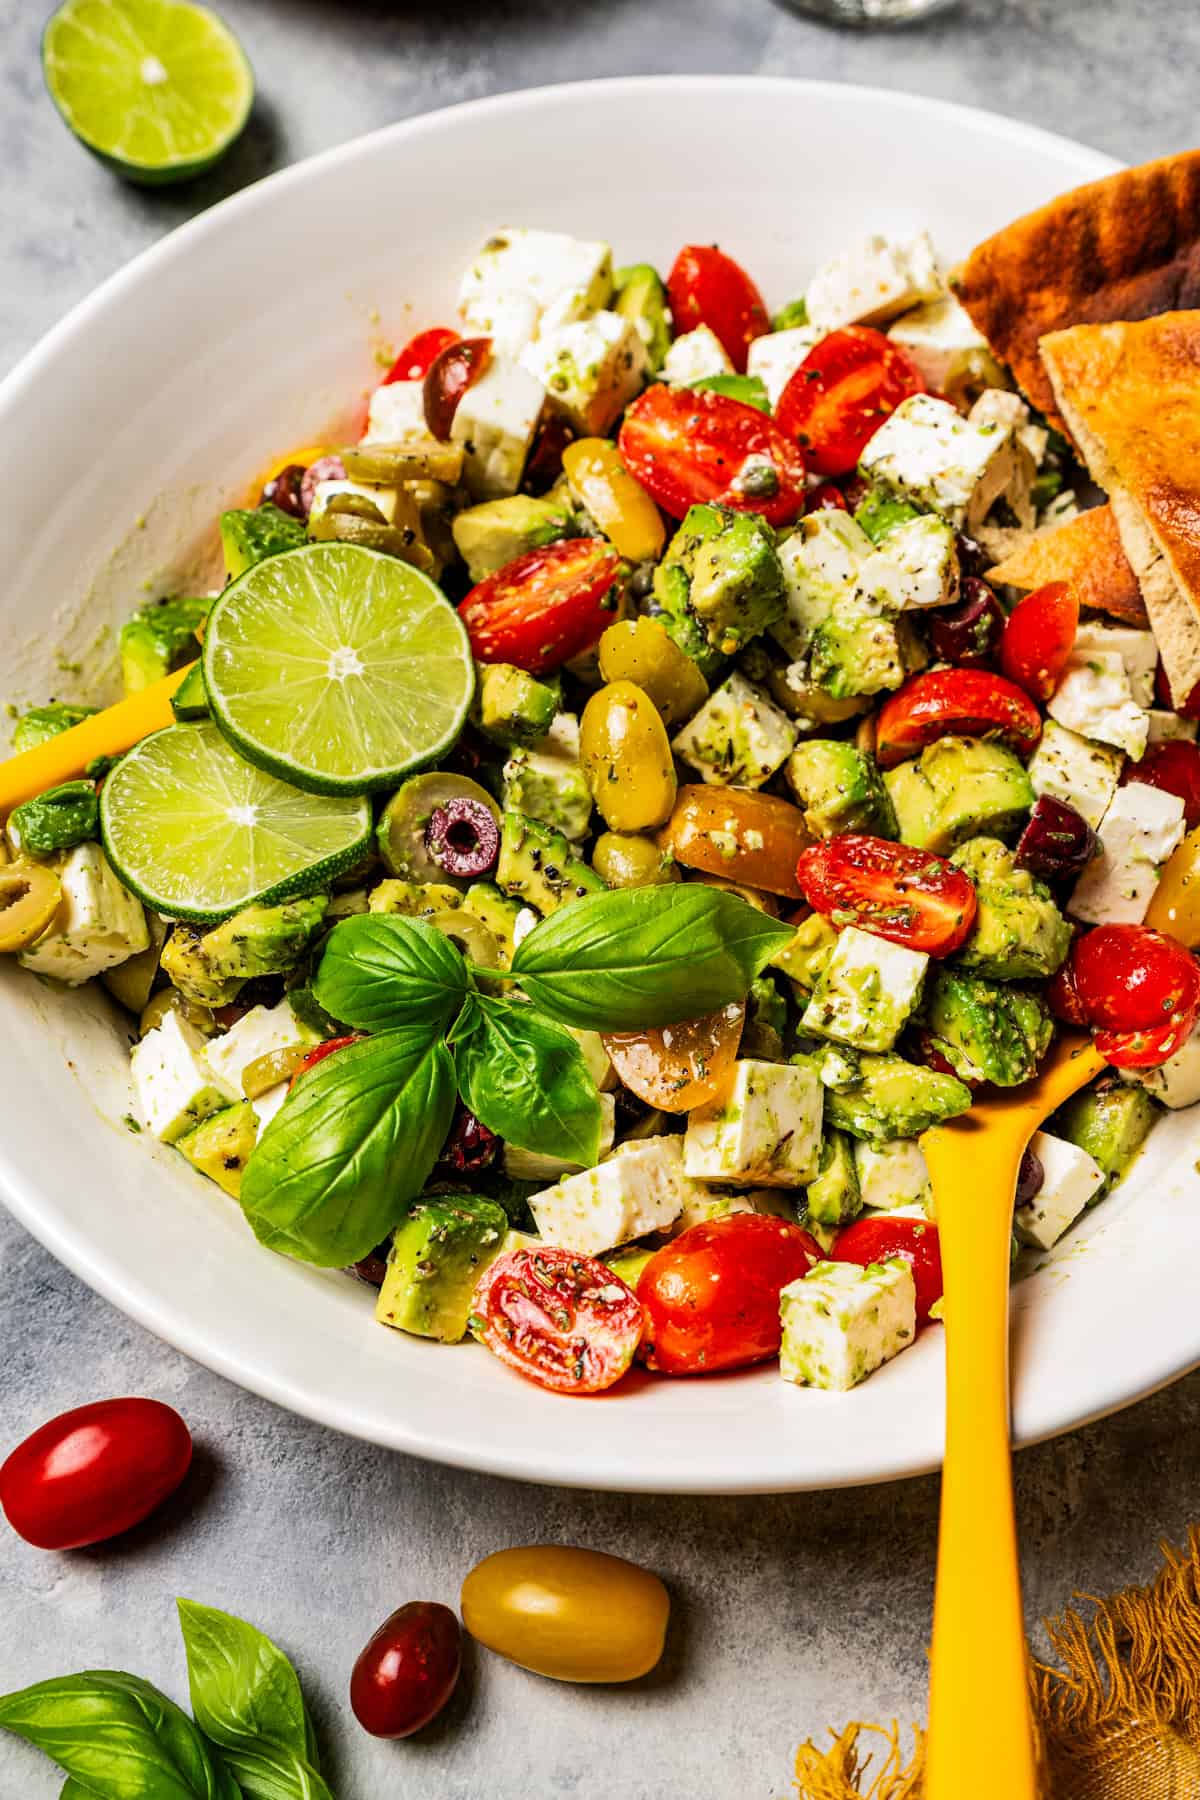 Diced avocados, olives, tomatoes, and feta in a large salad bowl garnished with fresh basil and lime slices.